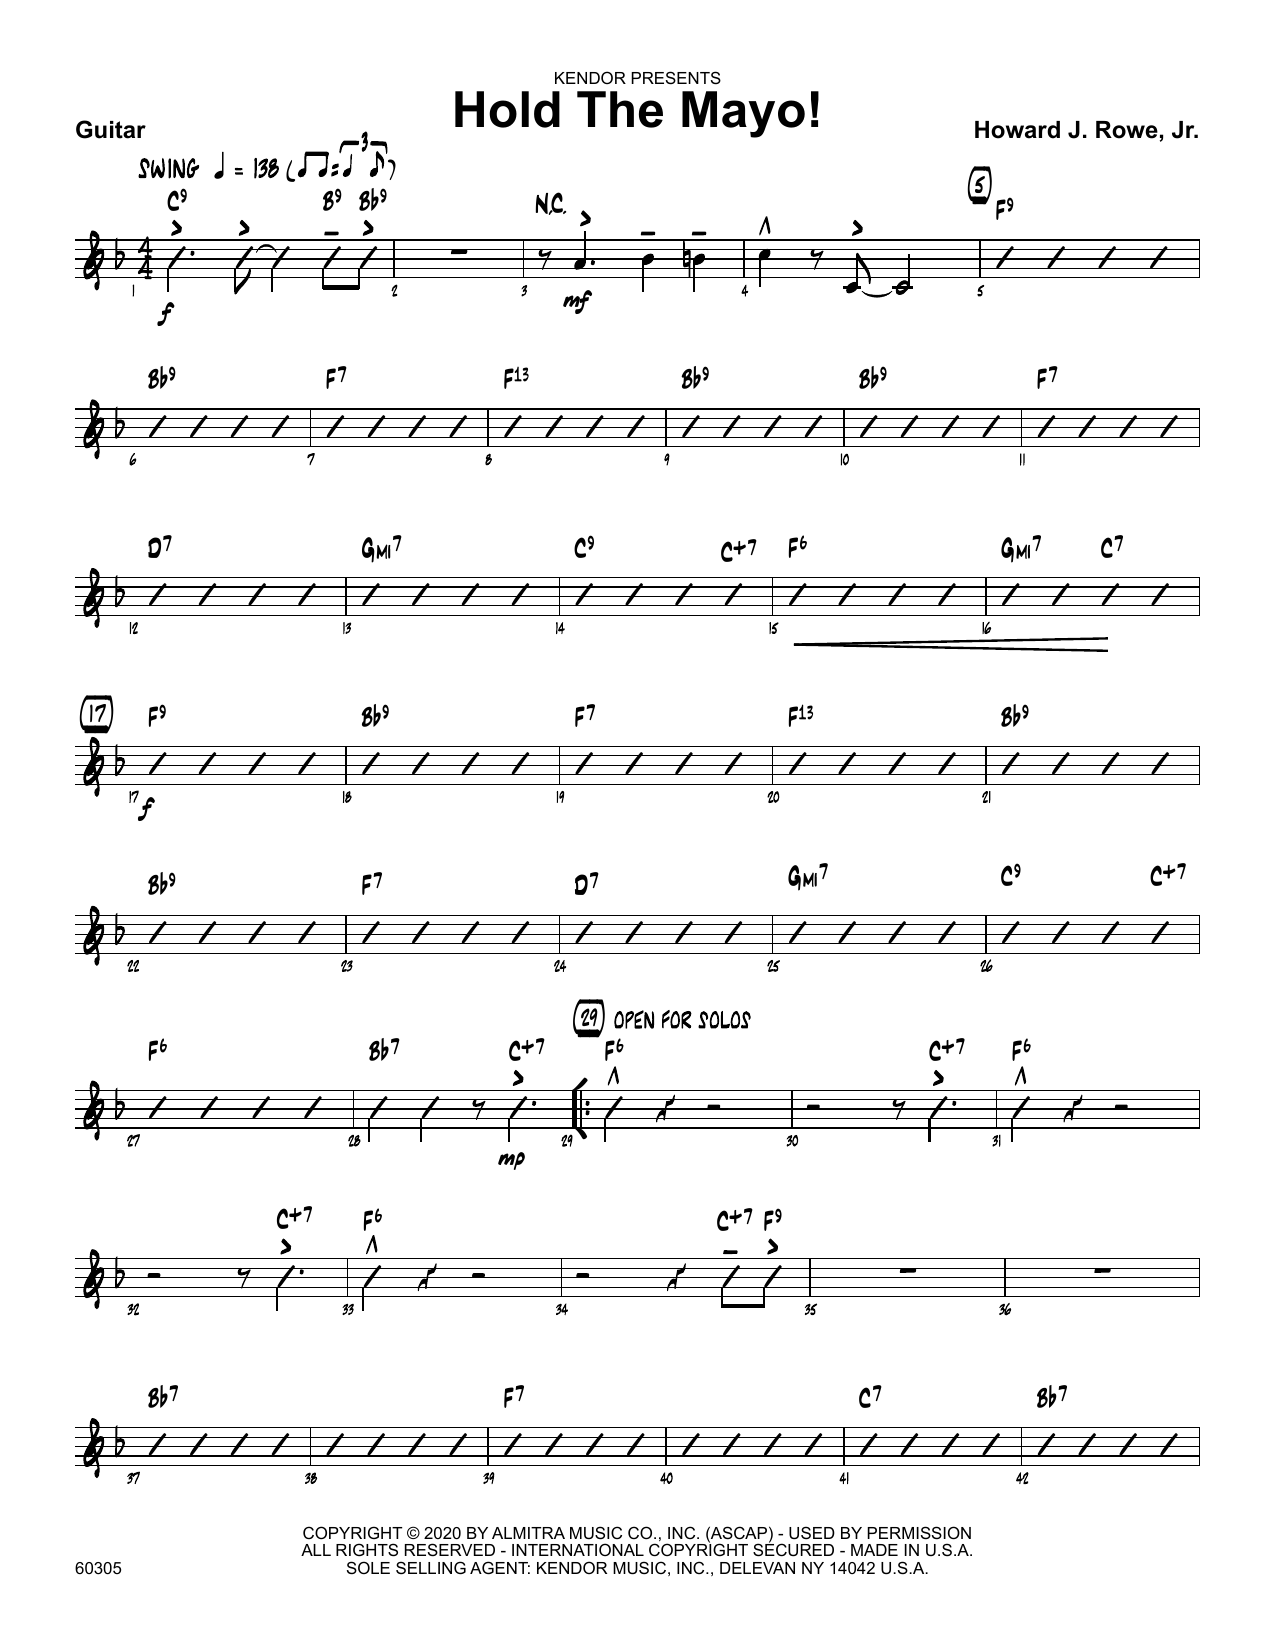 Download Howard Rowe Hold The Mayo! - Guitar Sheet Music